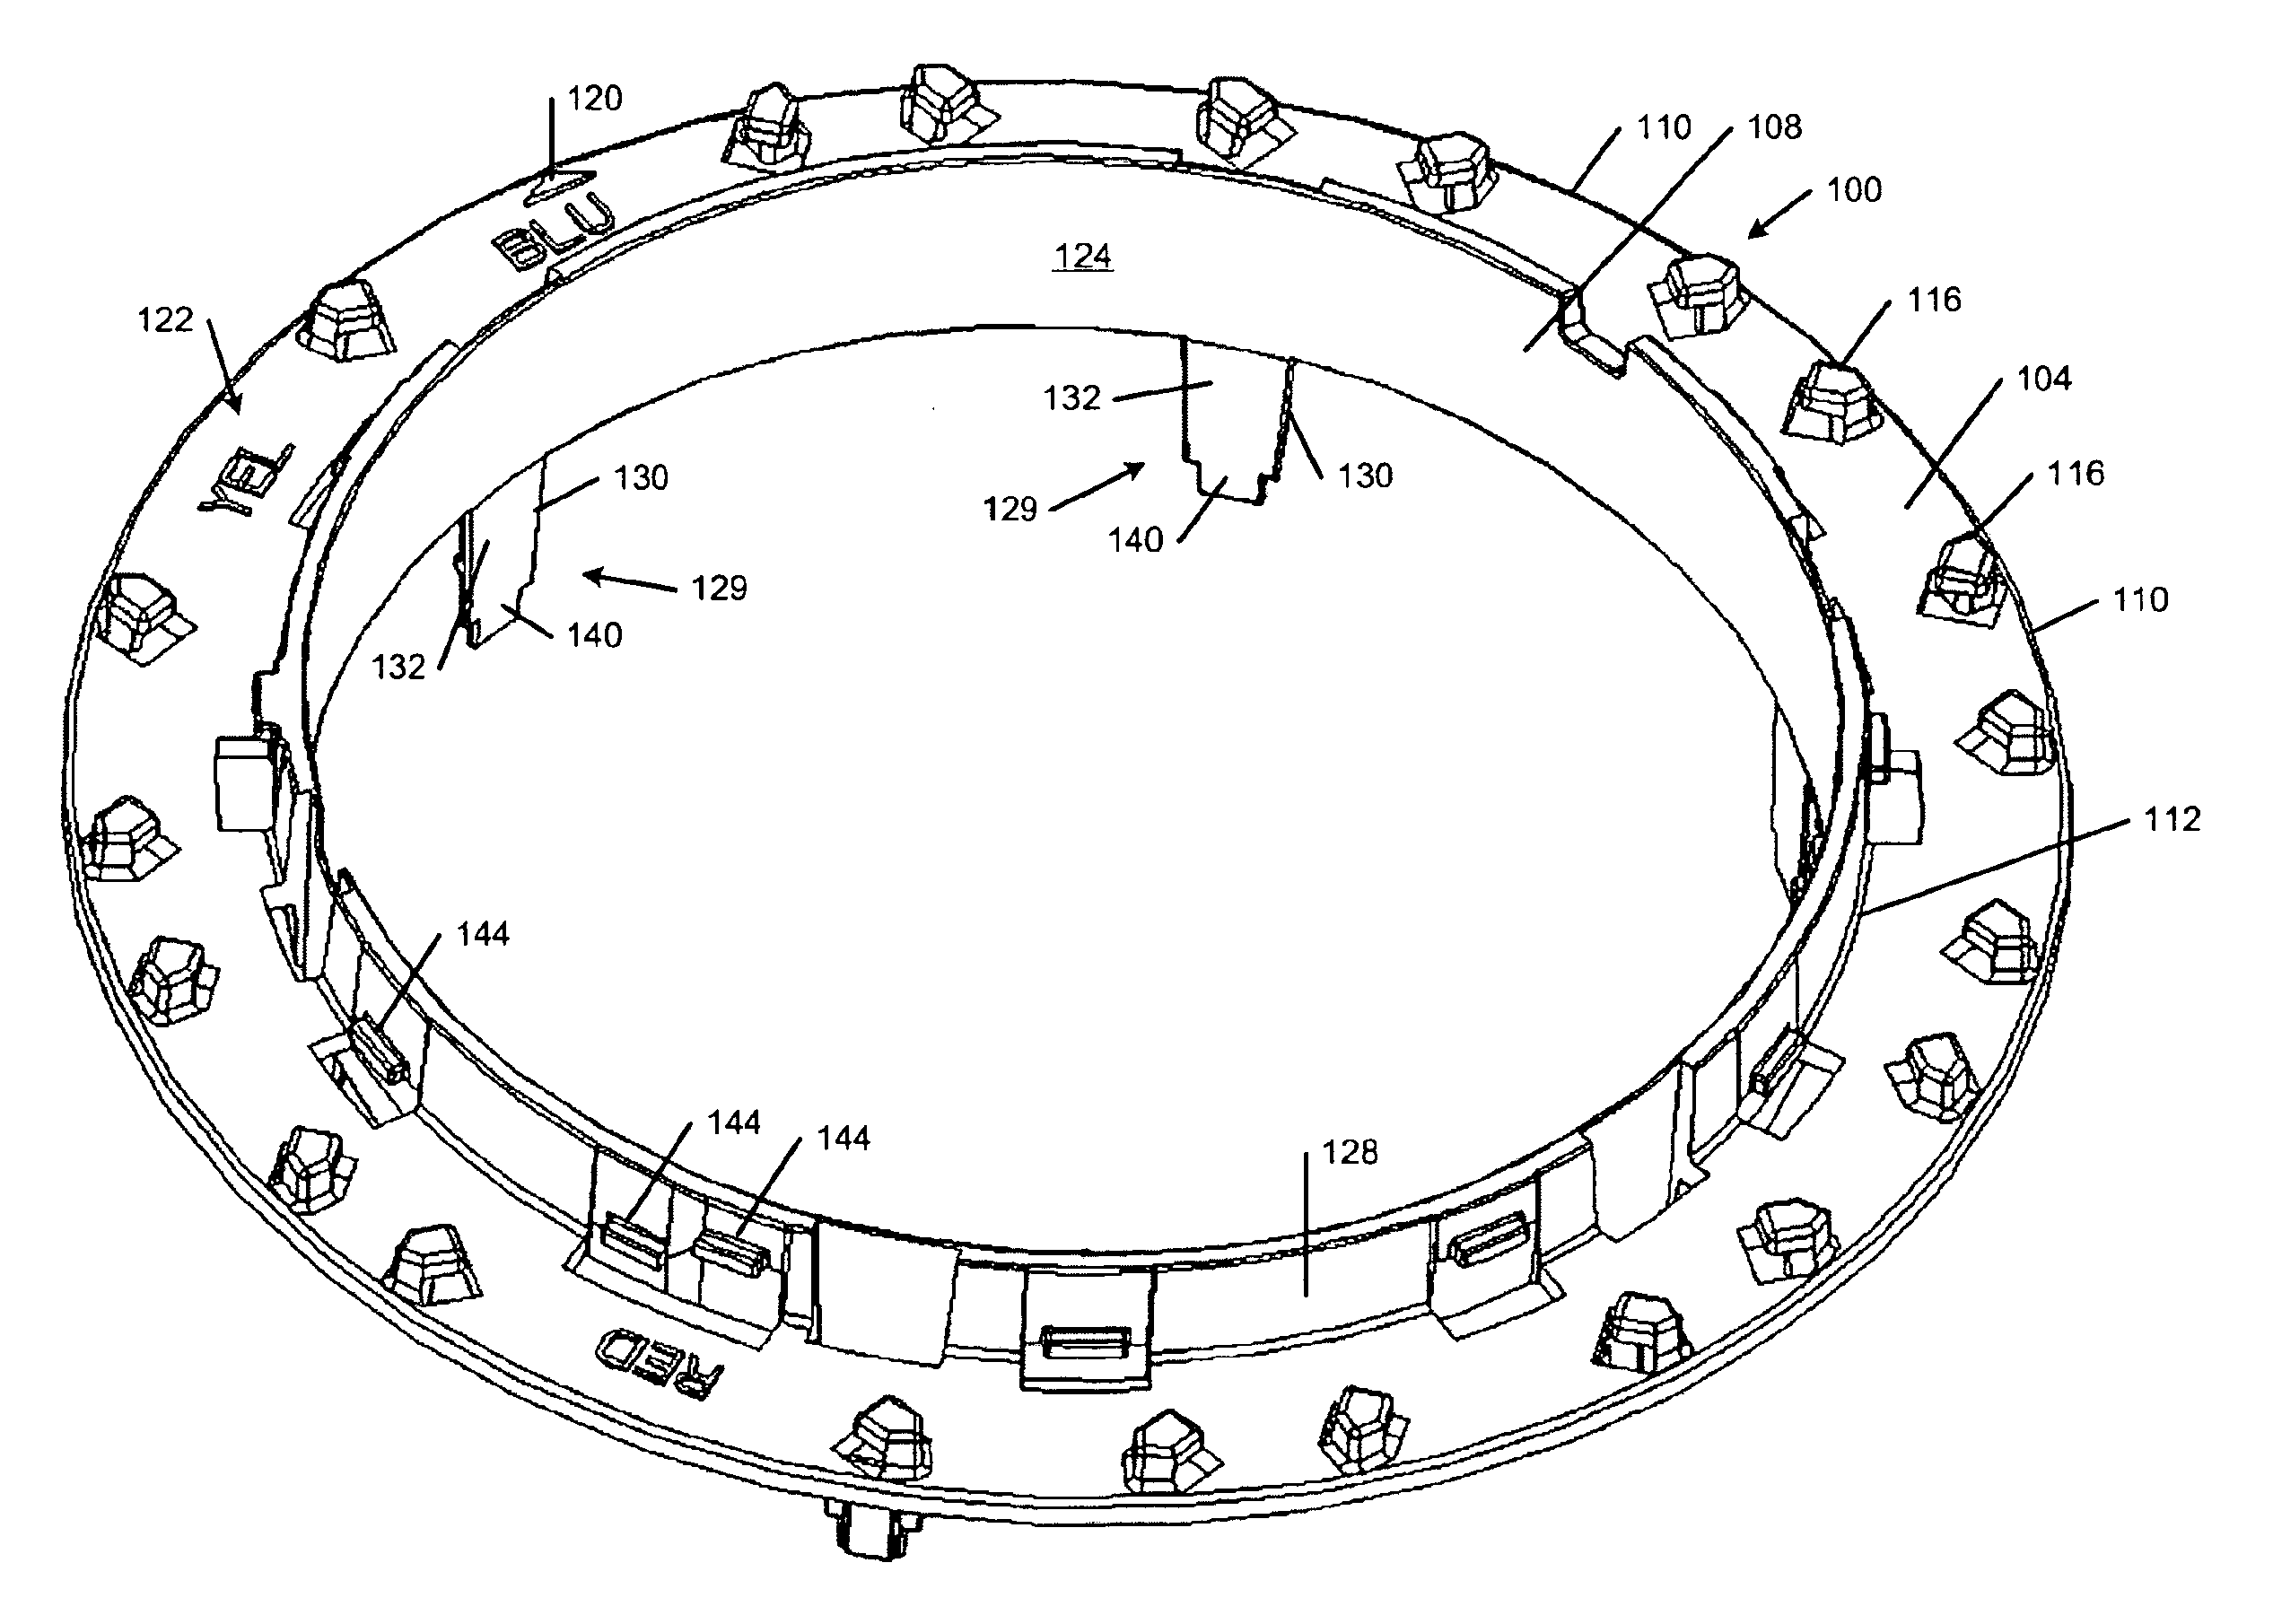 Interconnecting ring and wire guide